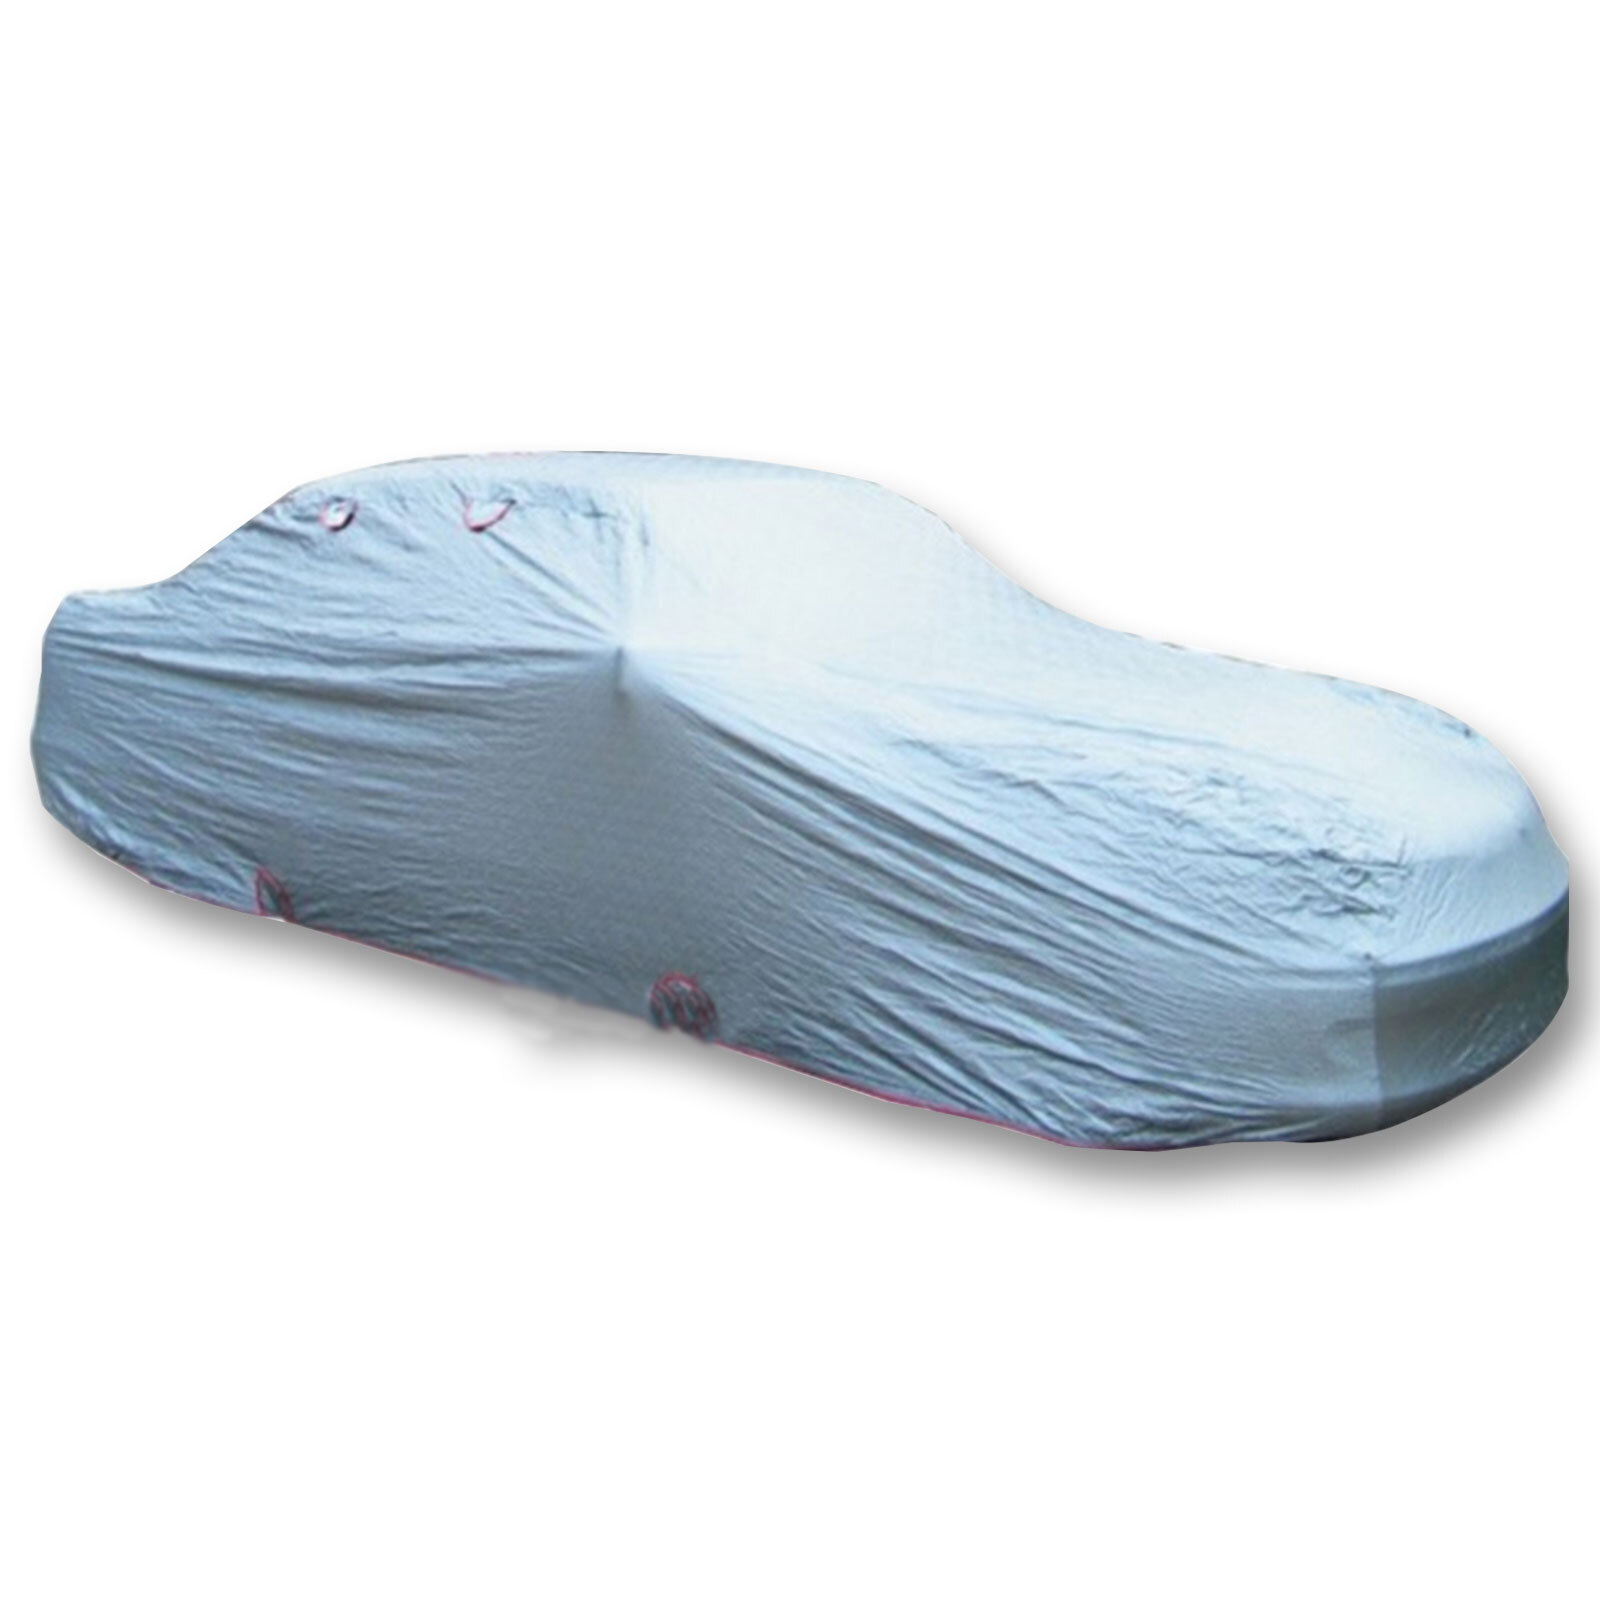 Mercedes C Class Large Water Resistant Car Cover 